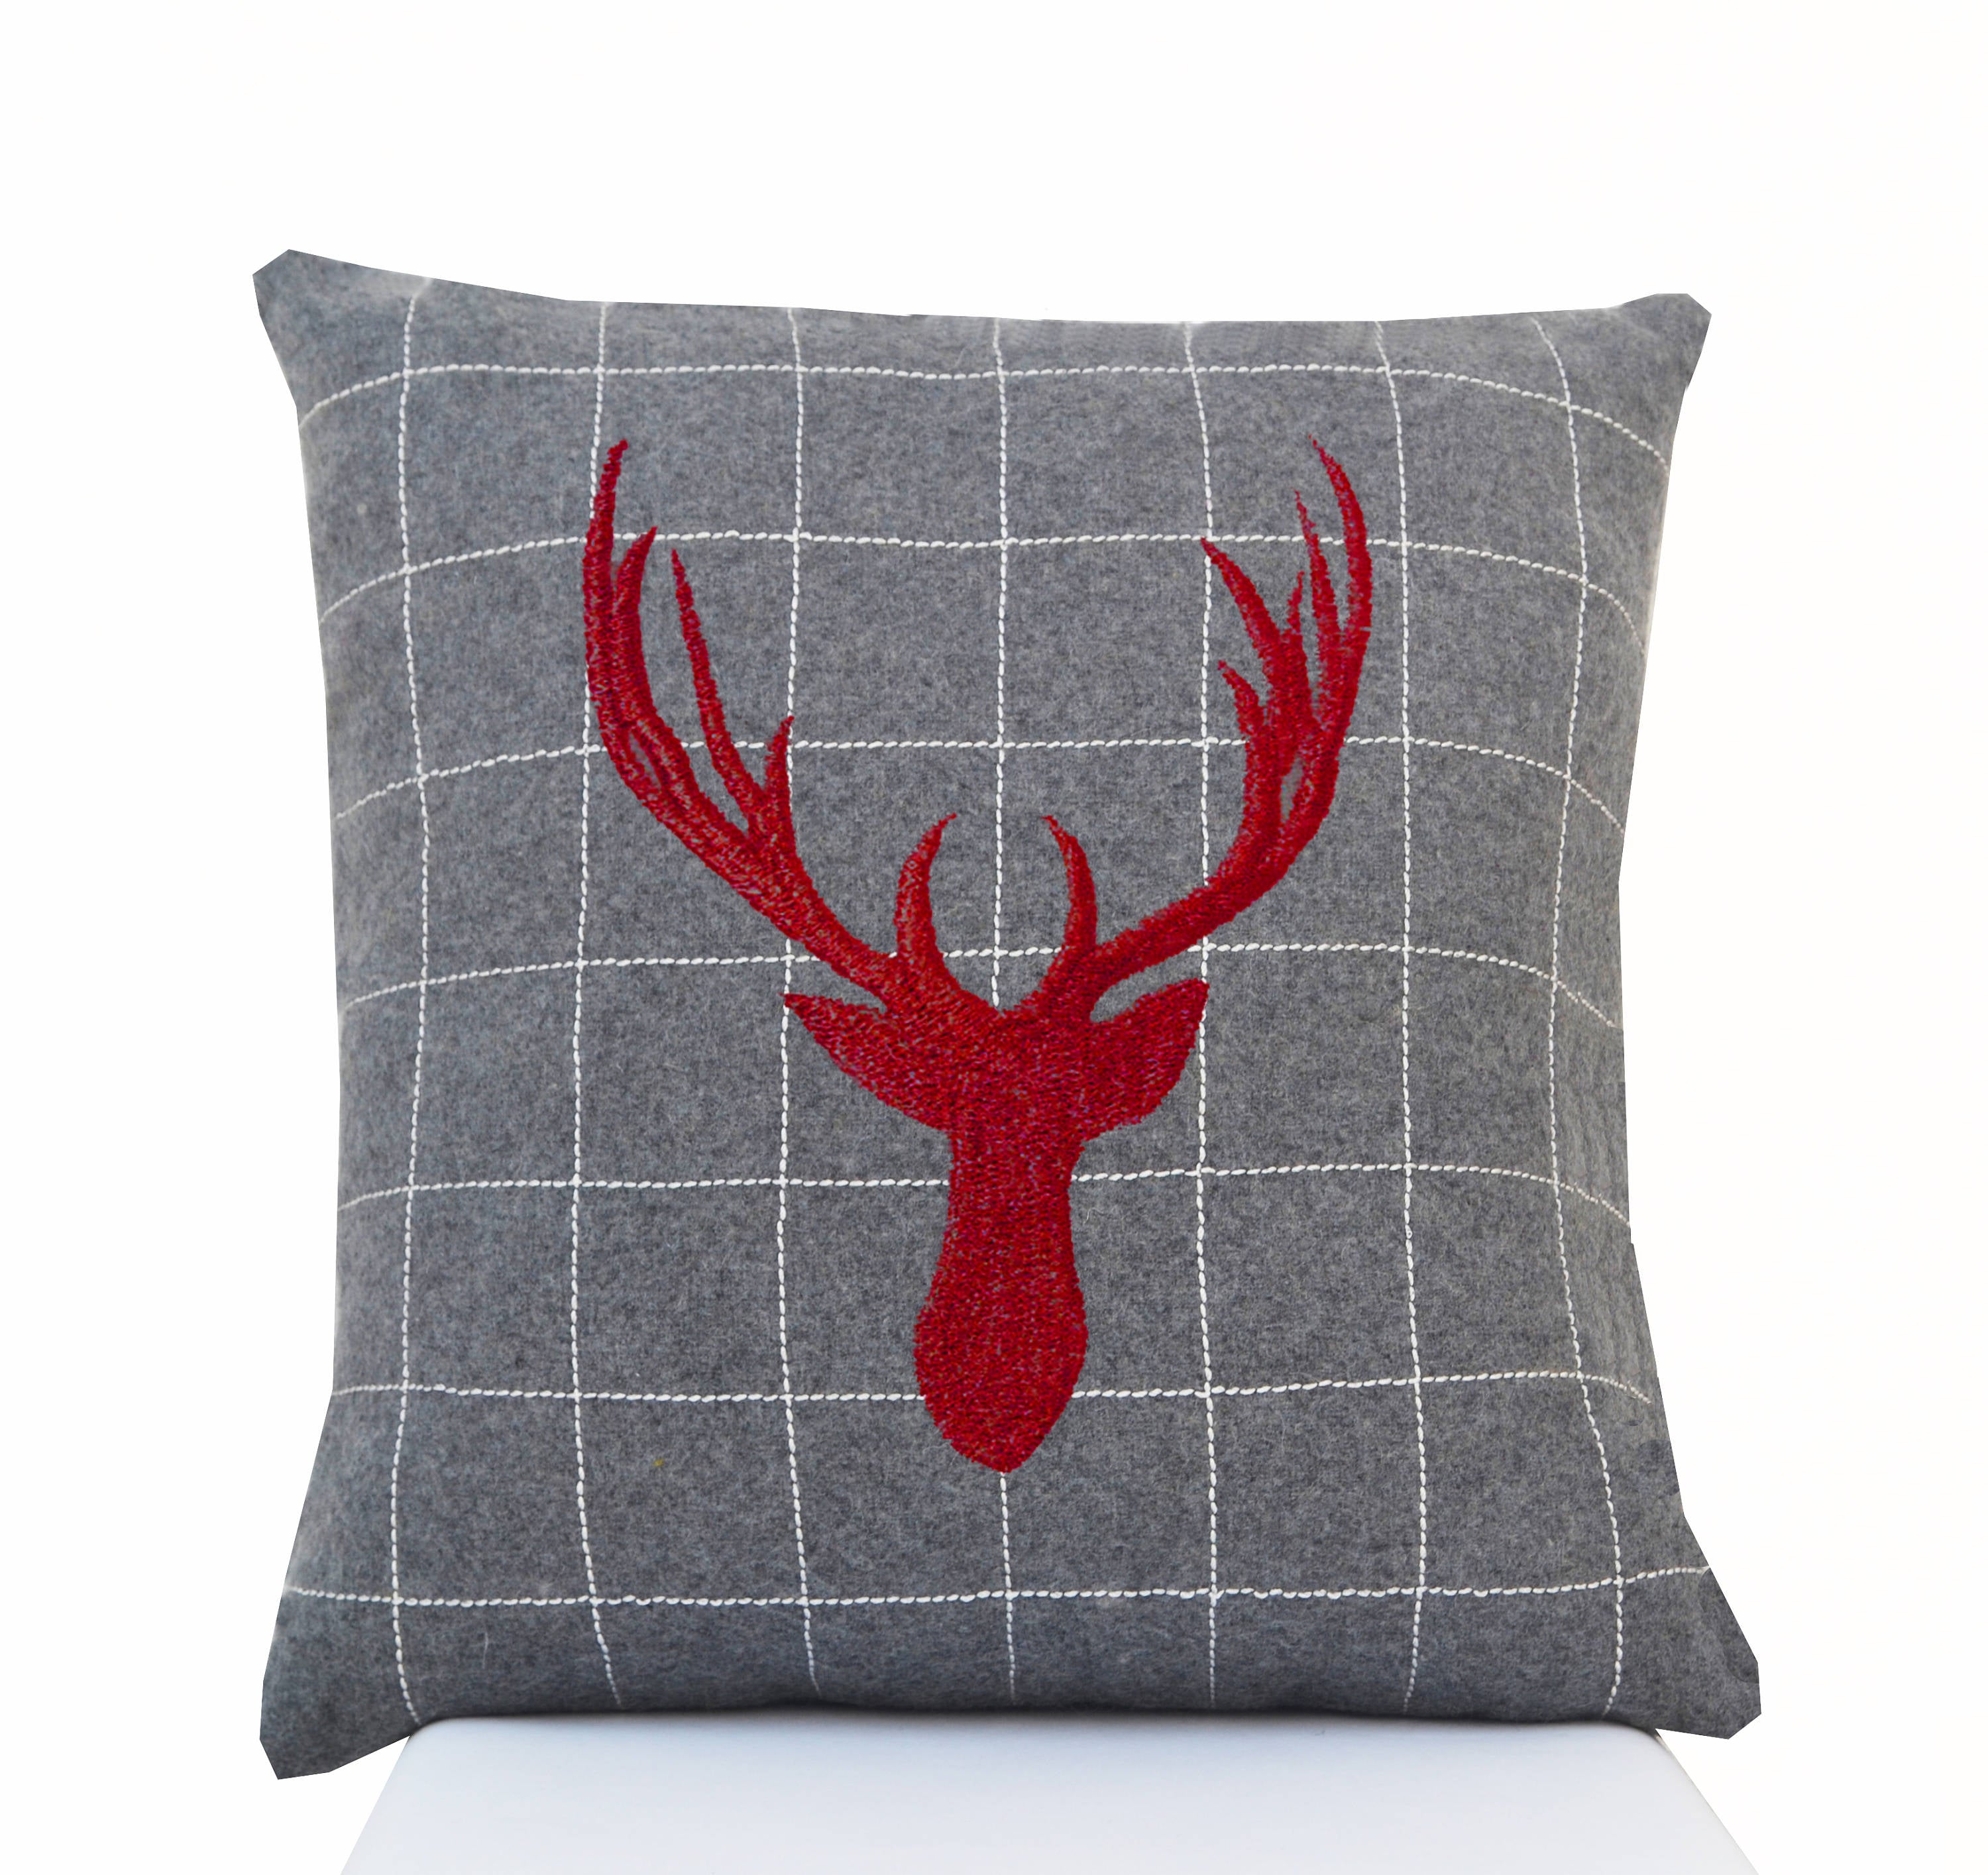 Reindeer embroidered felt pillow cover, Christmas gift